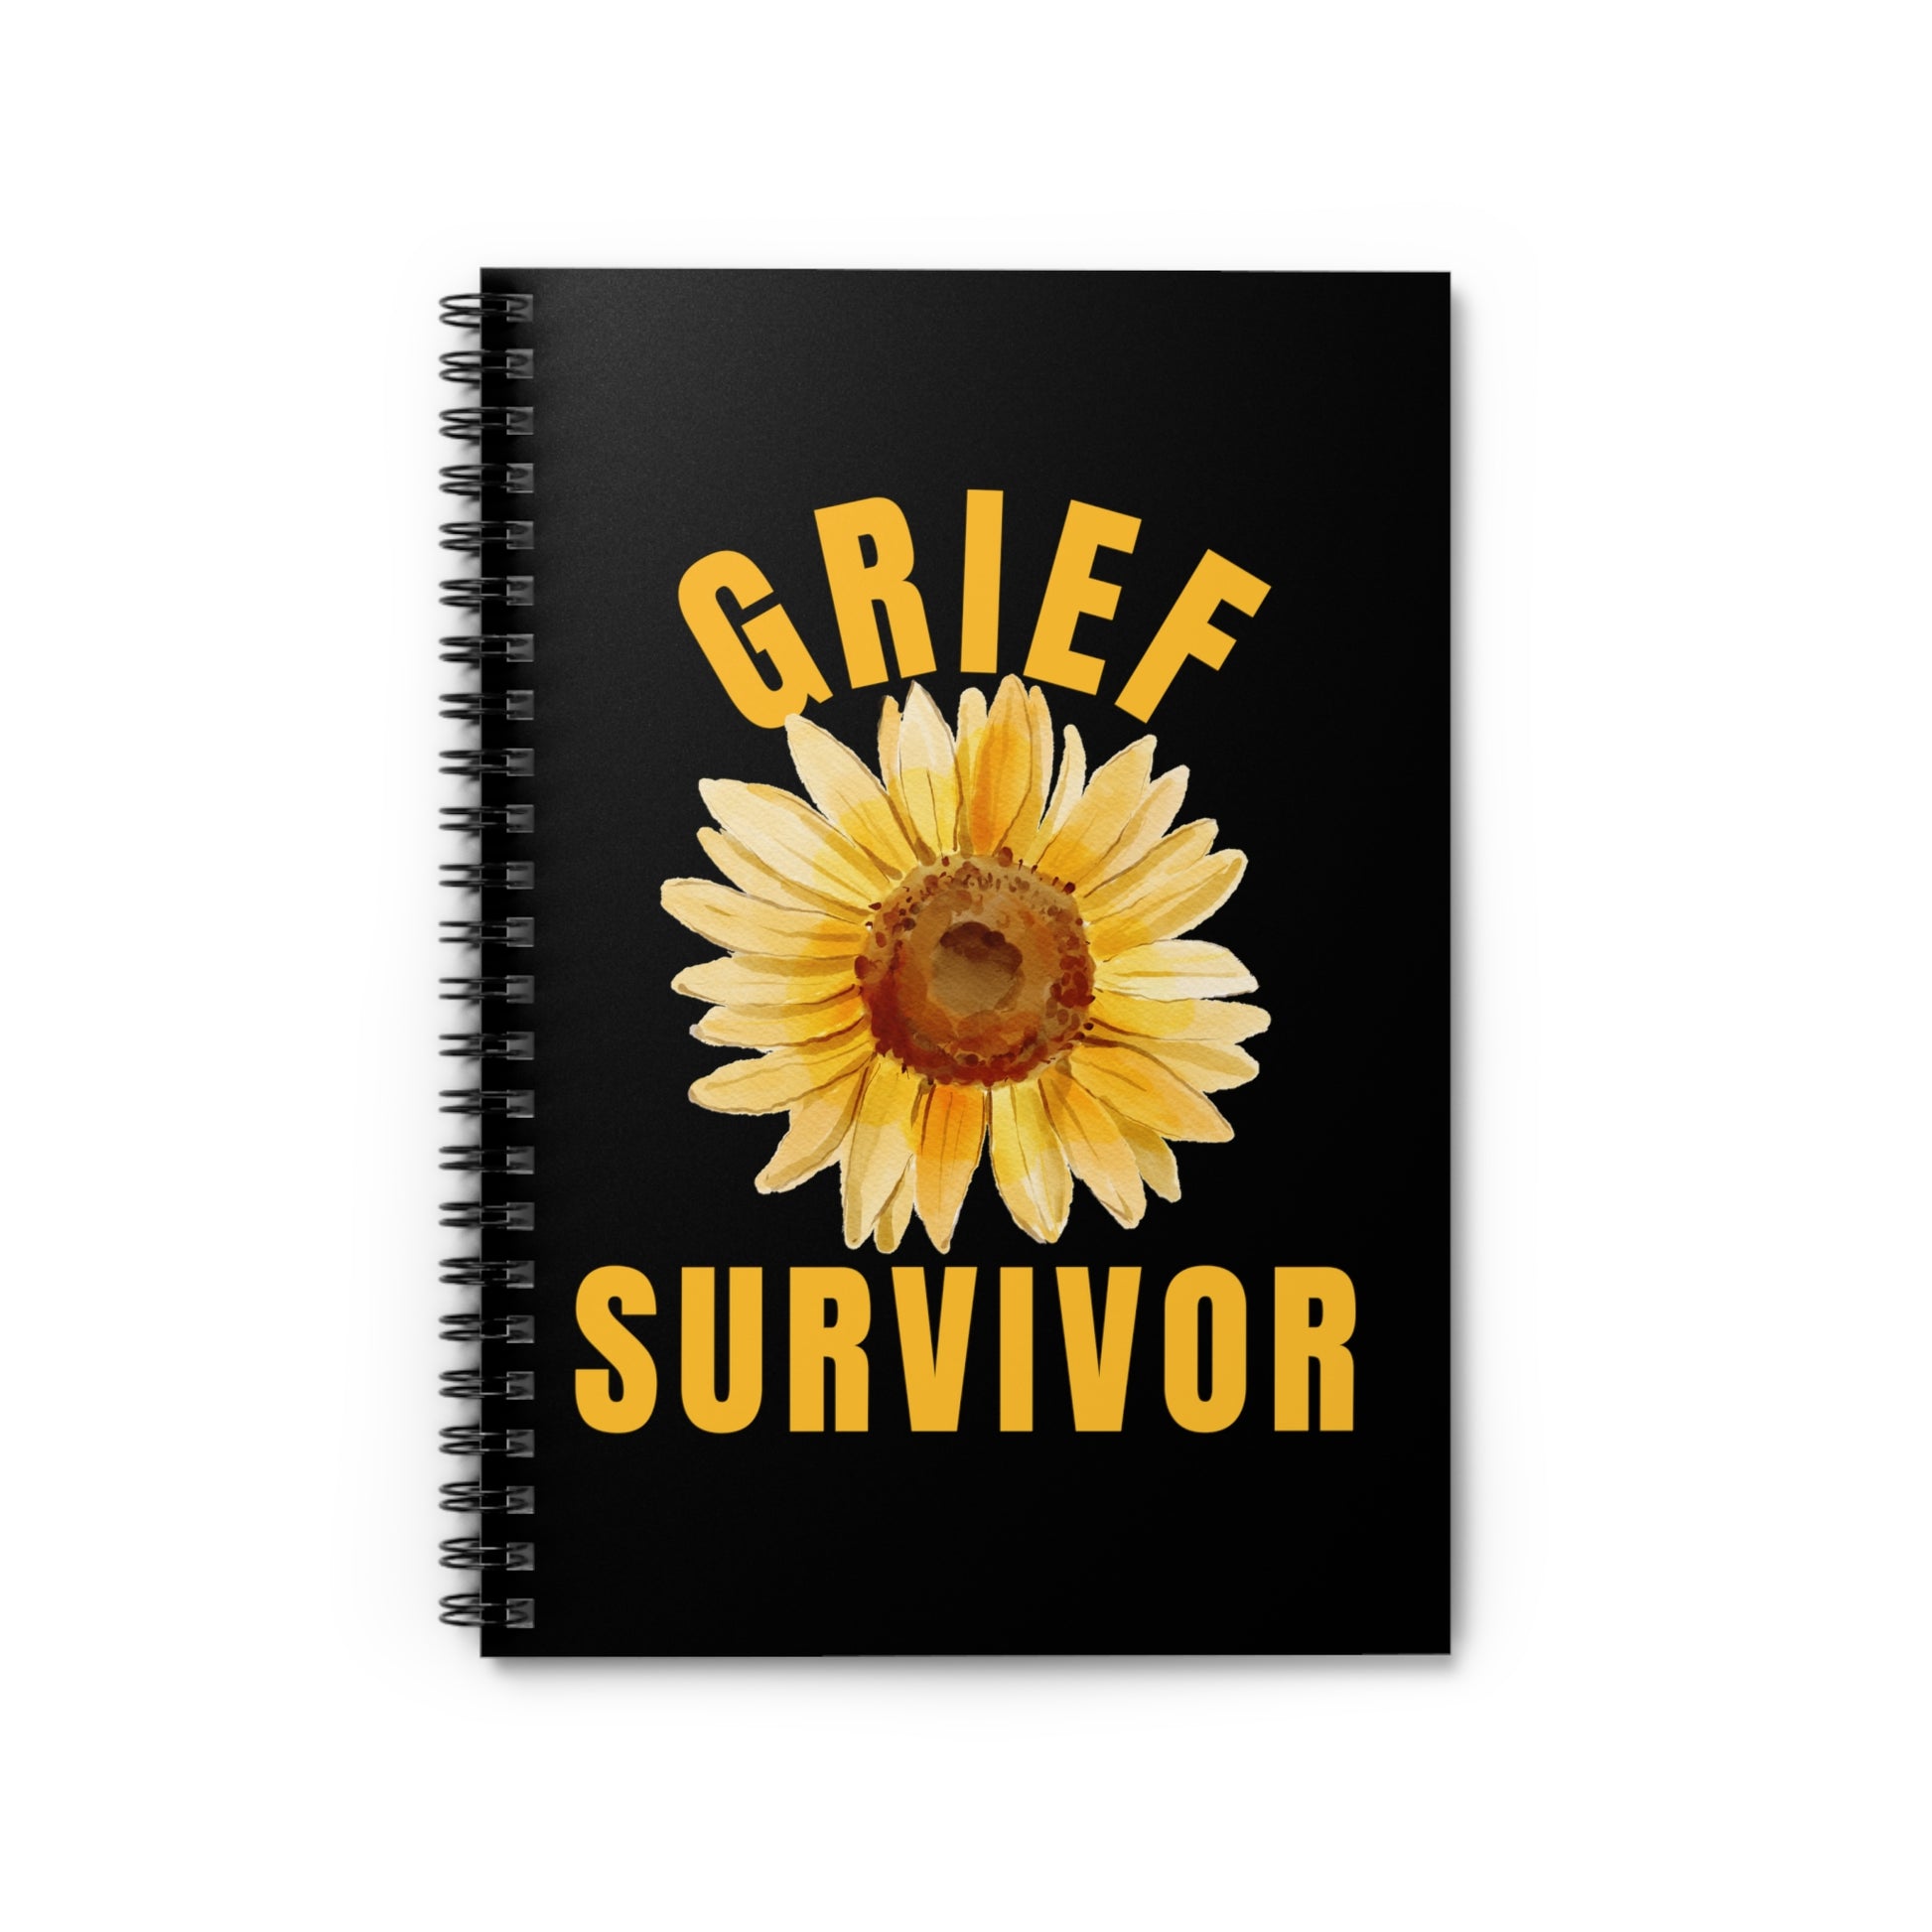 Need a token for a grieving friend or family member? This Grief Survivor Sunflower notebook makes the perfect sympathy gift. 